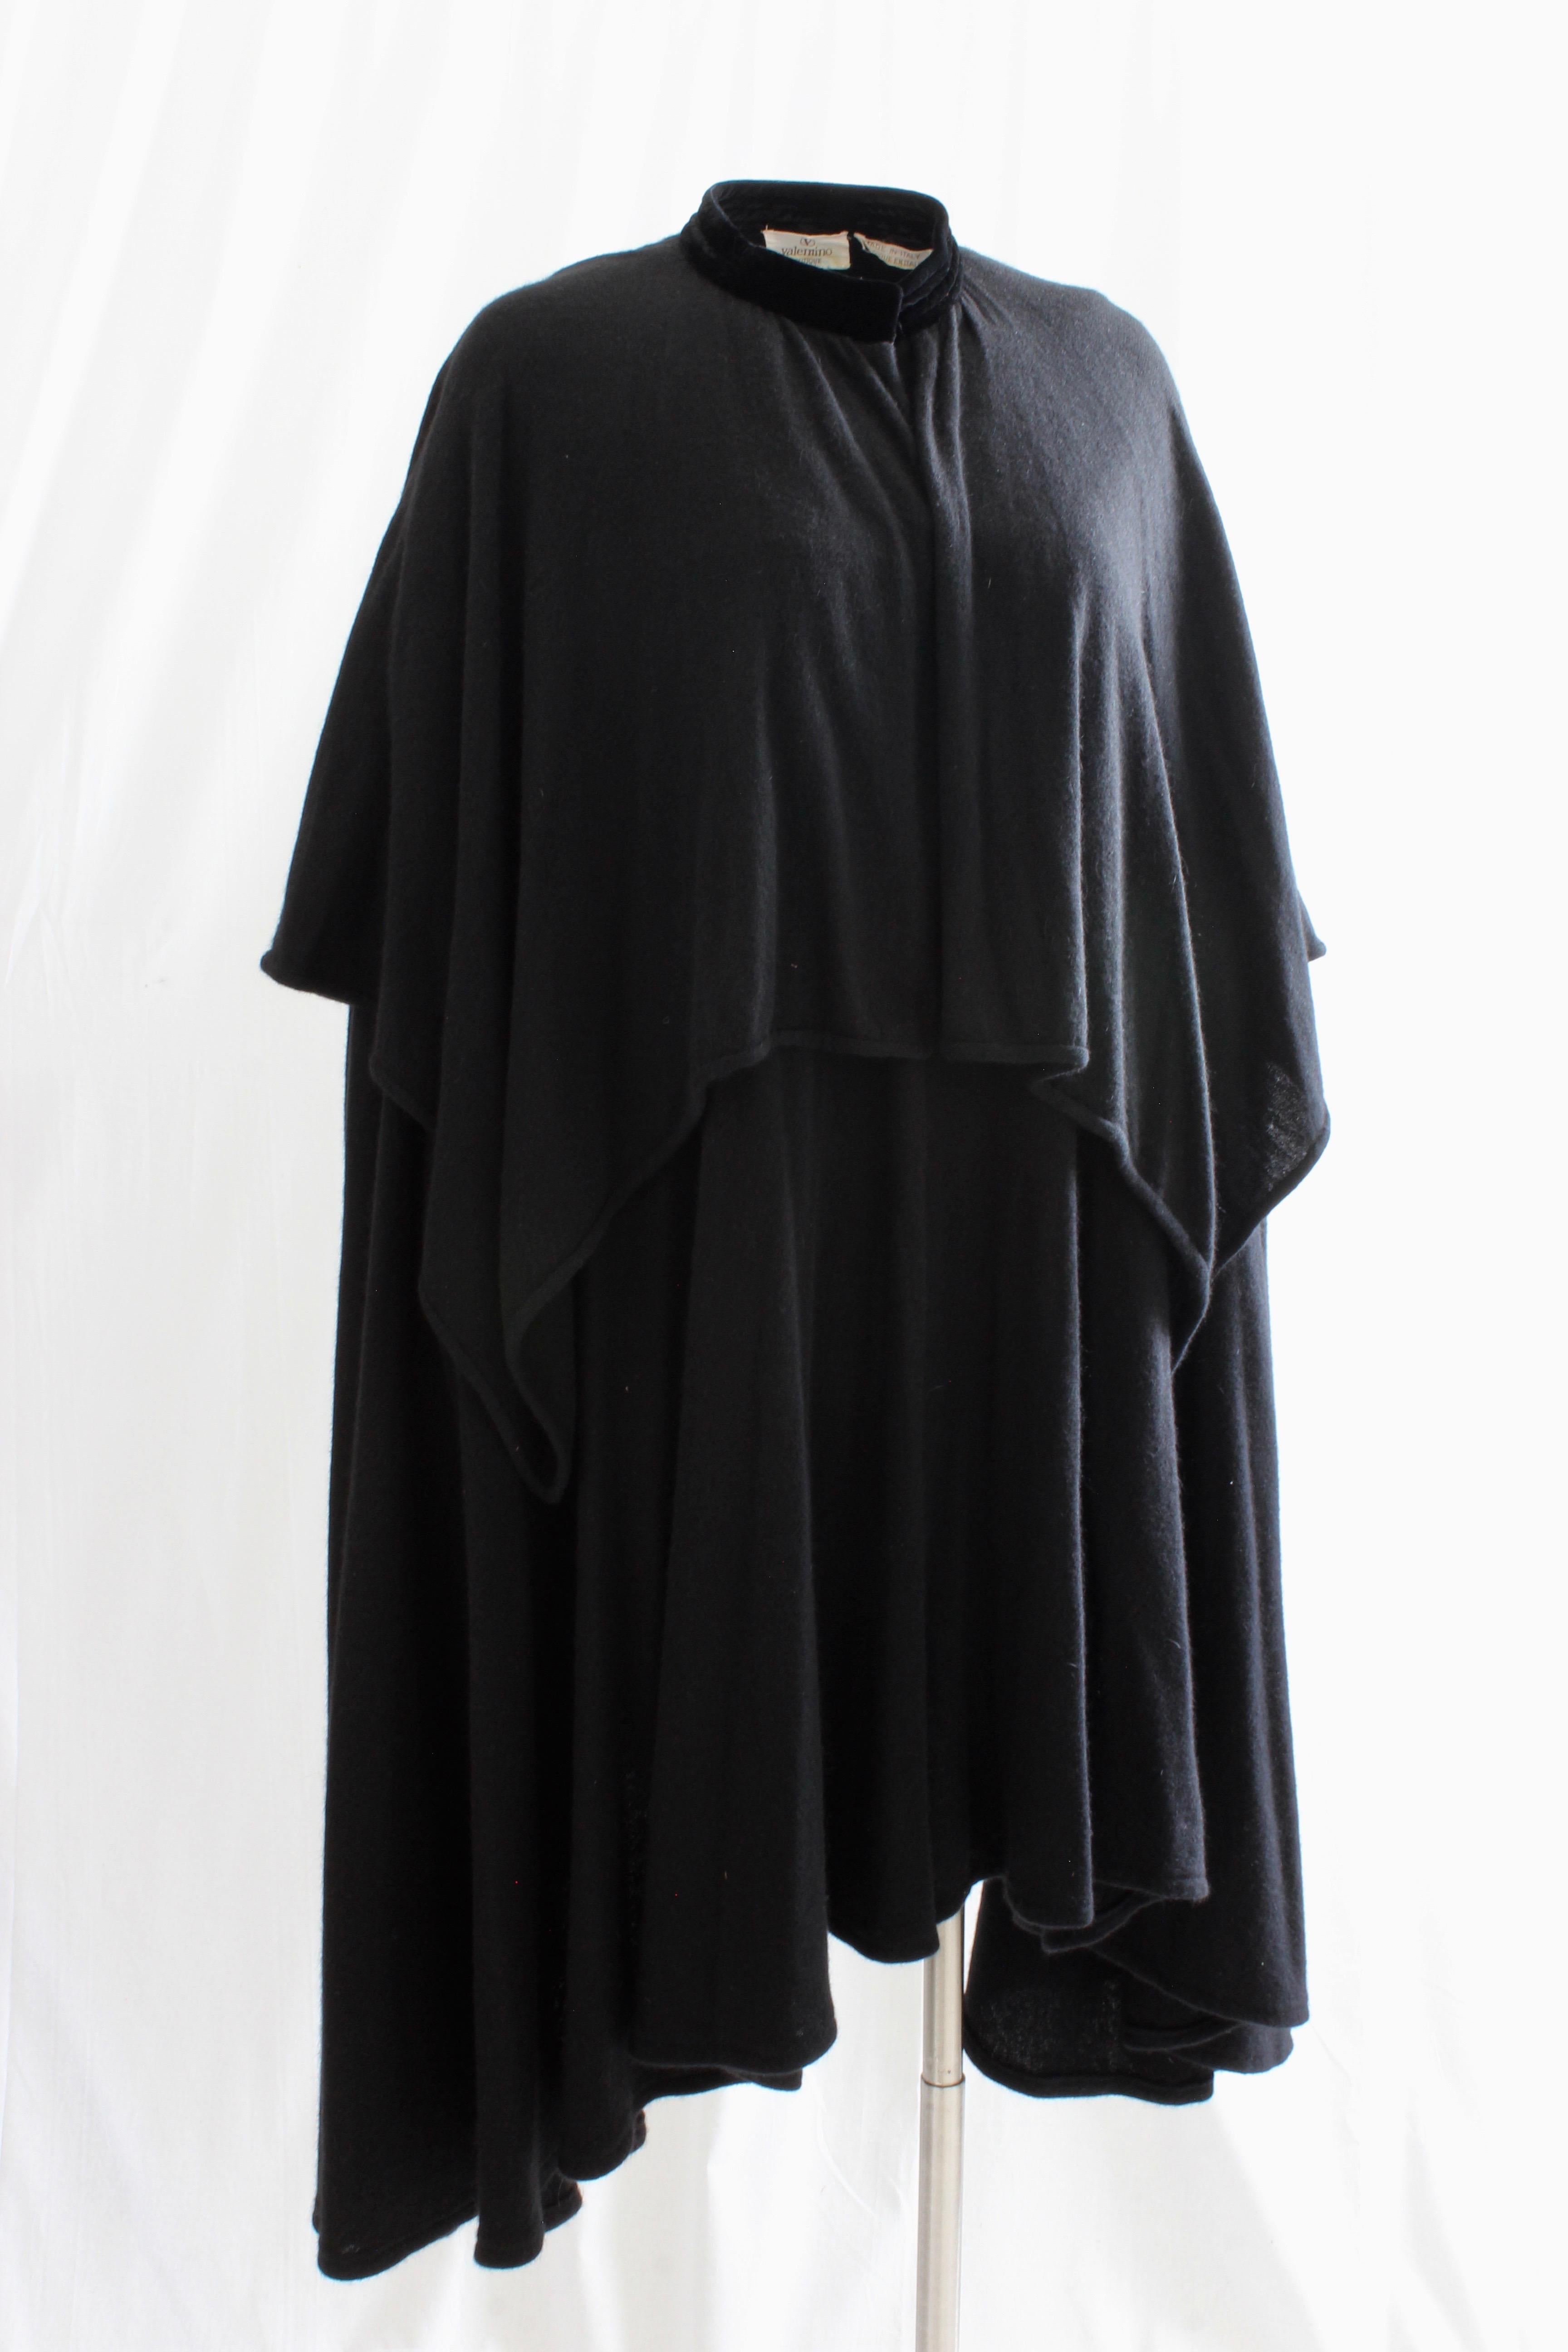 This gorgeous cape was made by Valentino, most likely in the early 1980s.  Made from what we believe is an angora wool blend knit (no content label) in black, it's incredibly soft, features a tiered caplet and fastens with two hook/eye closures at